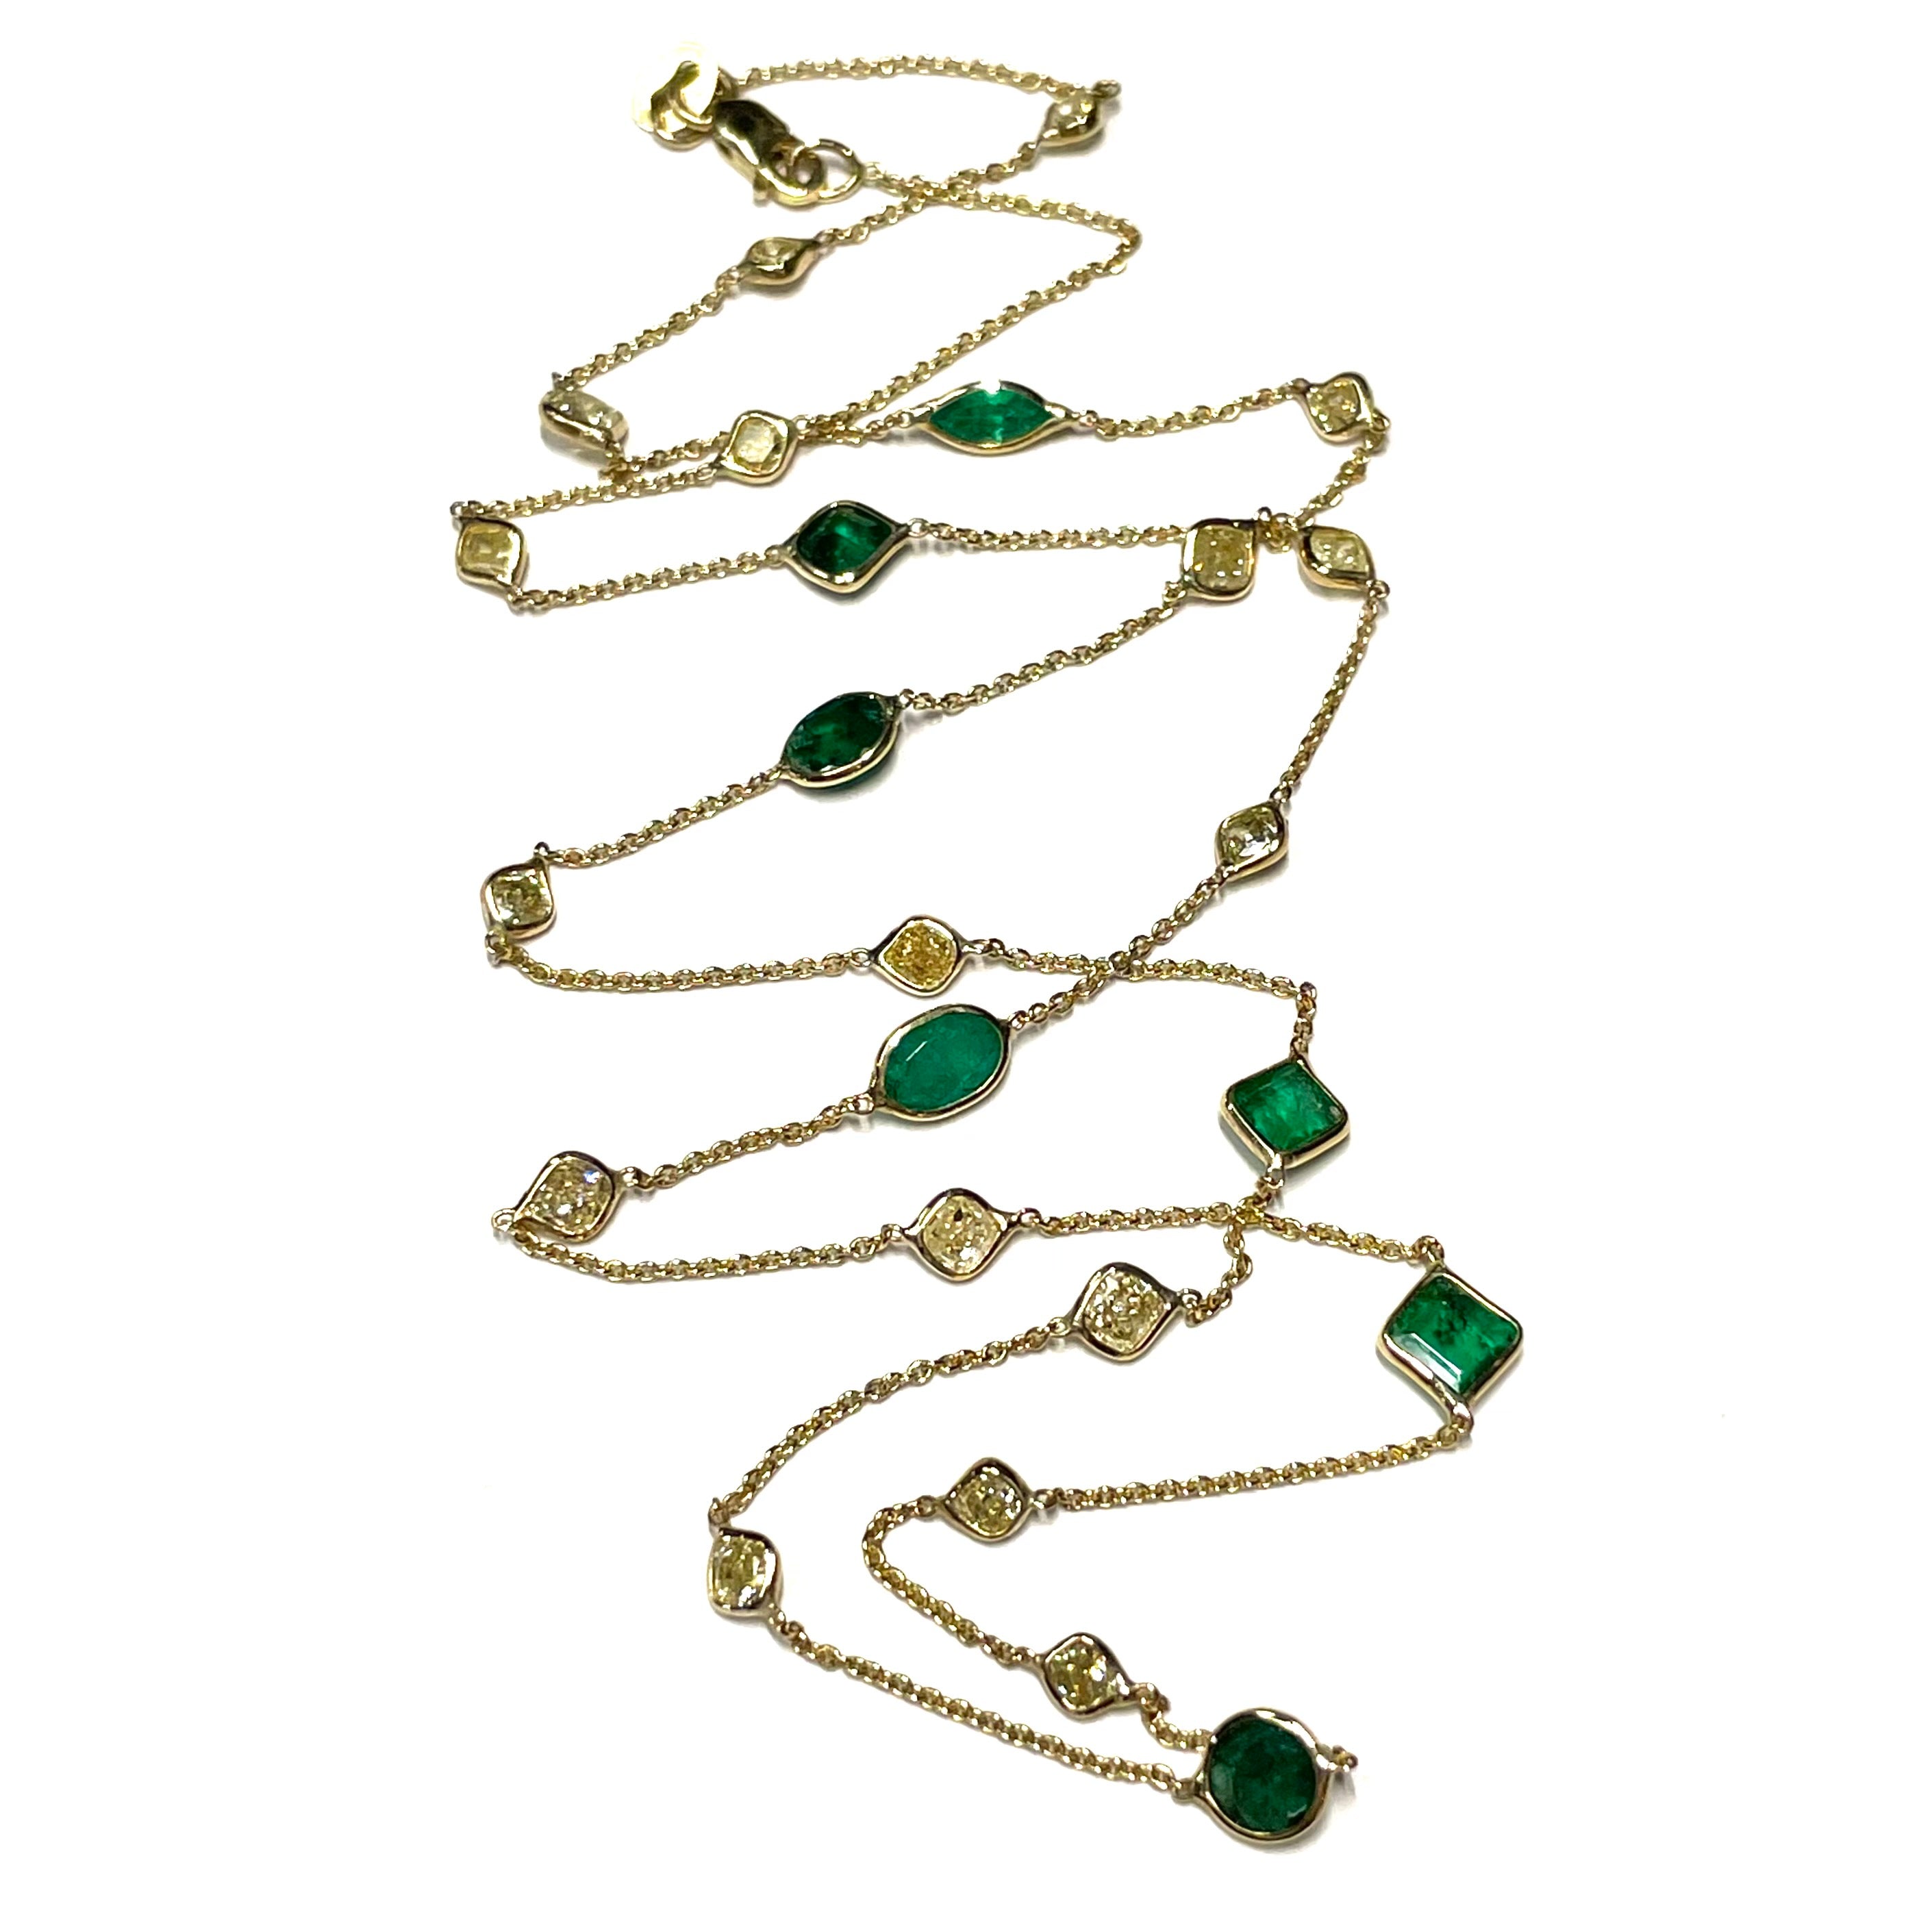 Emerald Diamond Necklace By The Yard in Solid 14k Yellow Gold